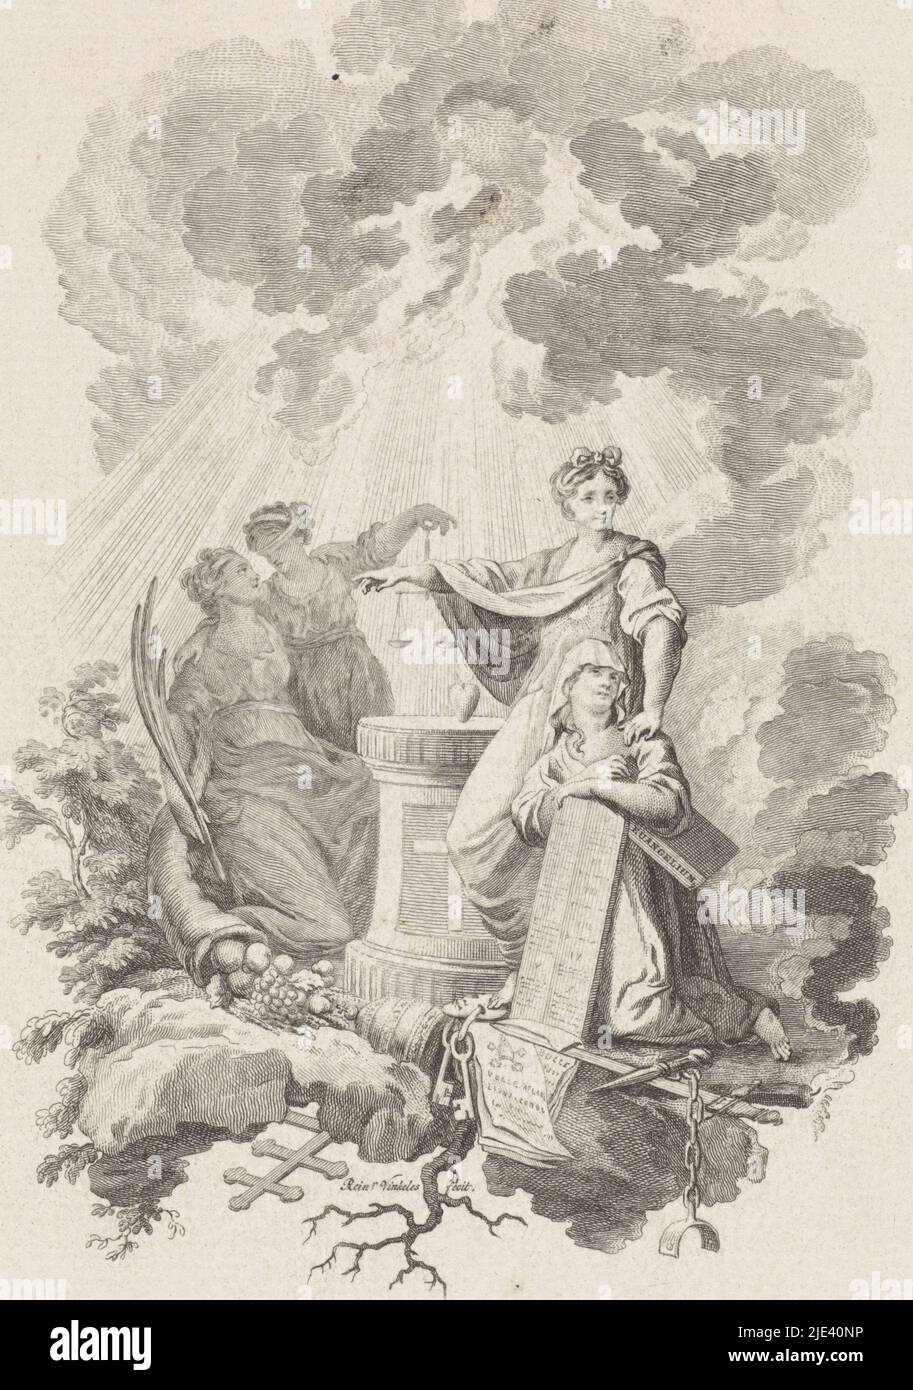 Title-print with four female personifications near a heart, Reinier Vinkeles (I), 1751 - 1816, Four female personifications illuminated by sunbeams stand near a pied-à-terre on which is a heart. A veiled woman, the personification of Faith, leans with her arm on a stone table while the personification of Truth places her hand on her mantel and tramples on a mask. The blindfolded personification of Justice holds up a pair of scales and wraps an arm around Prophecy, who carries a palm branch and the horn of plenty., print maker: Reinier Vinkeles (I), (mentioned on object), print maker: Fredrik Stock Photo